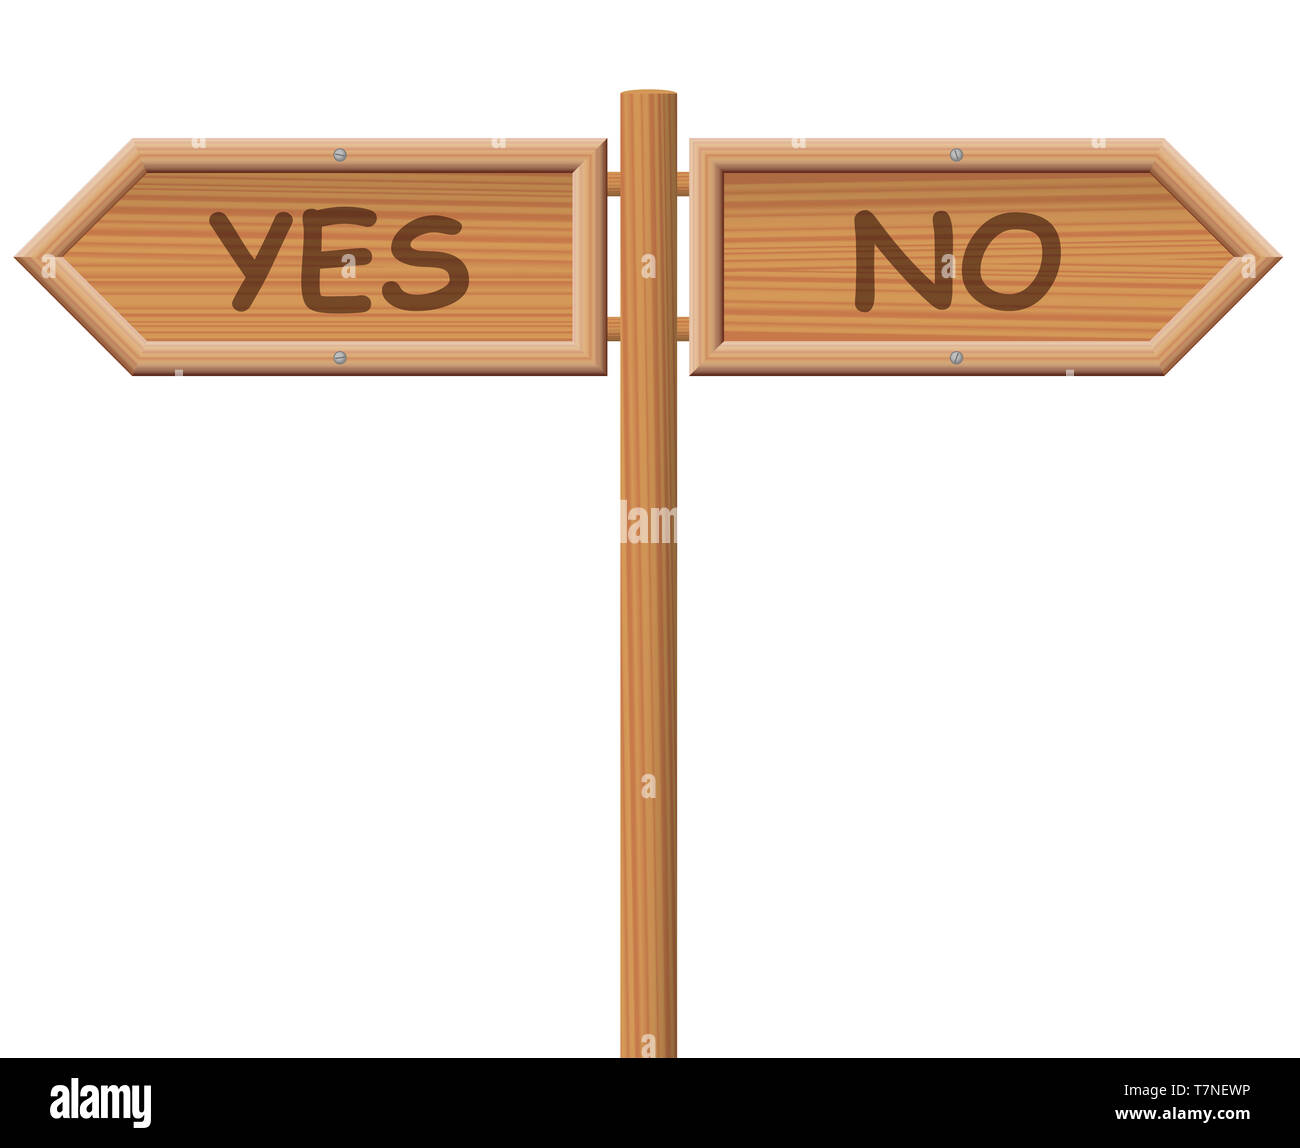 YES NO street sign, wooden style. Symbolic for decision difficulties. Make a choice, choose your path. Stock Photo